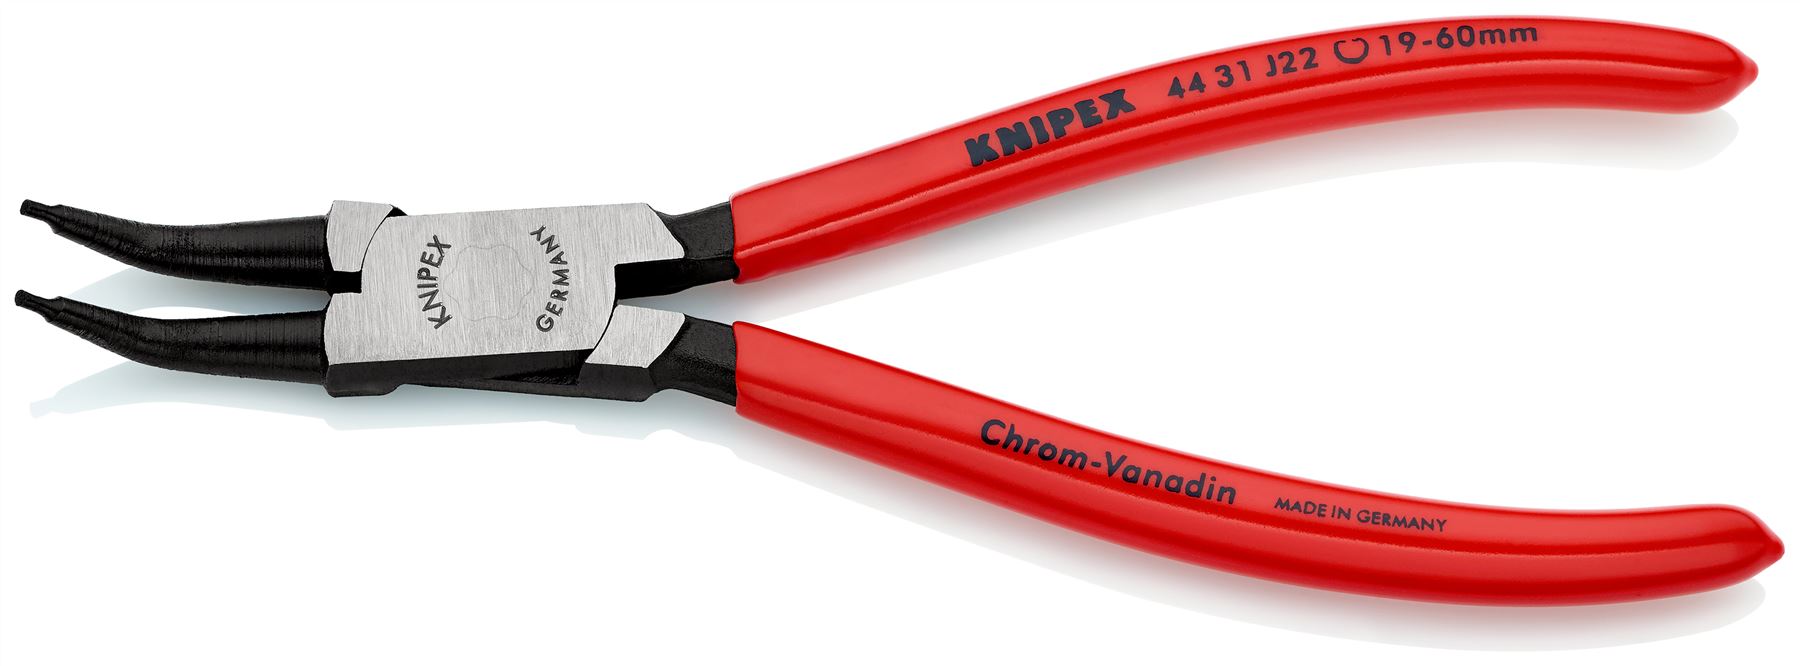 KNIPEX Circlip Pliers for Internal Circlips in Bore Holes 45° Angled 180mm 1.8mm Diameter Tips 44 31 J22